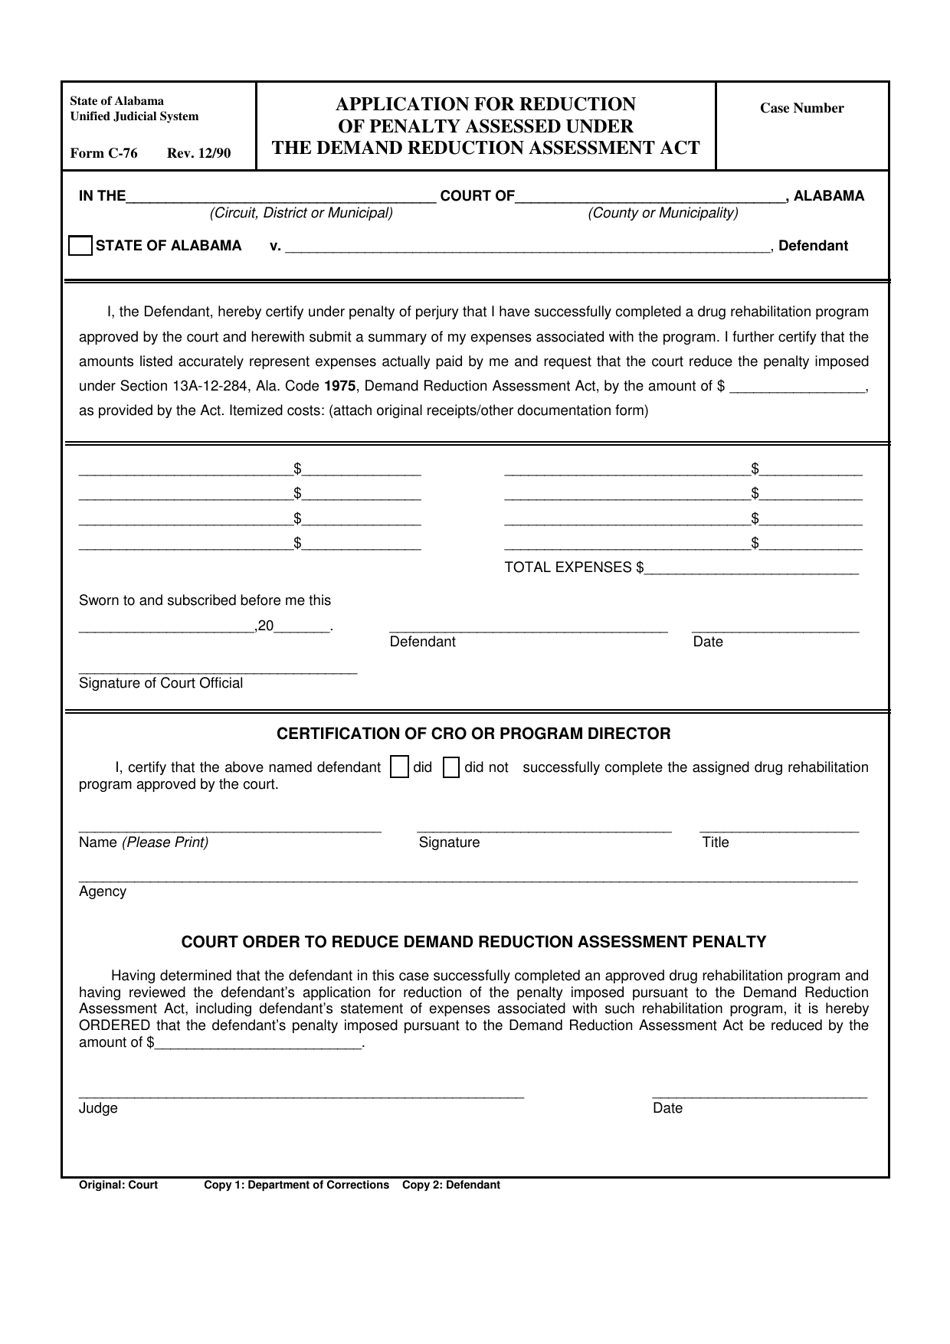 Form C-76 Application for Reduction of Penalty Assessed Under the Demand Reduction Assessment Act - Alabama, Page 1